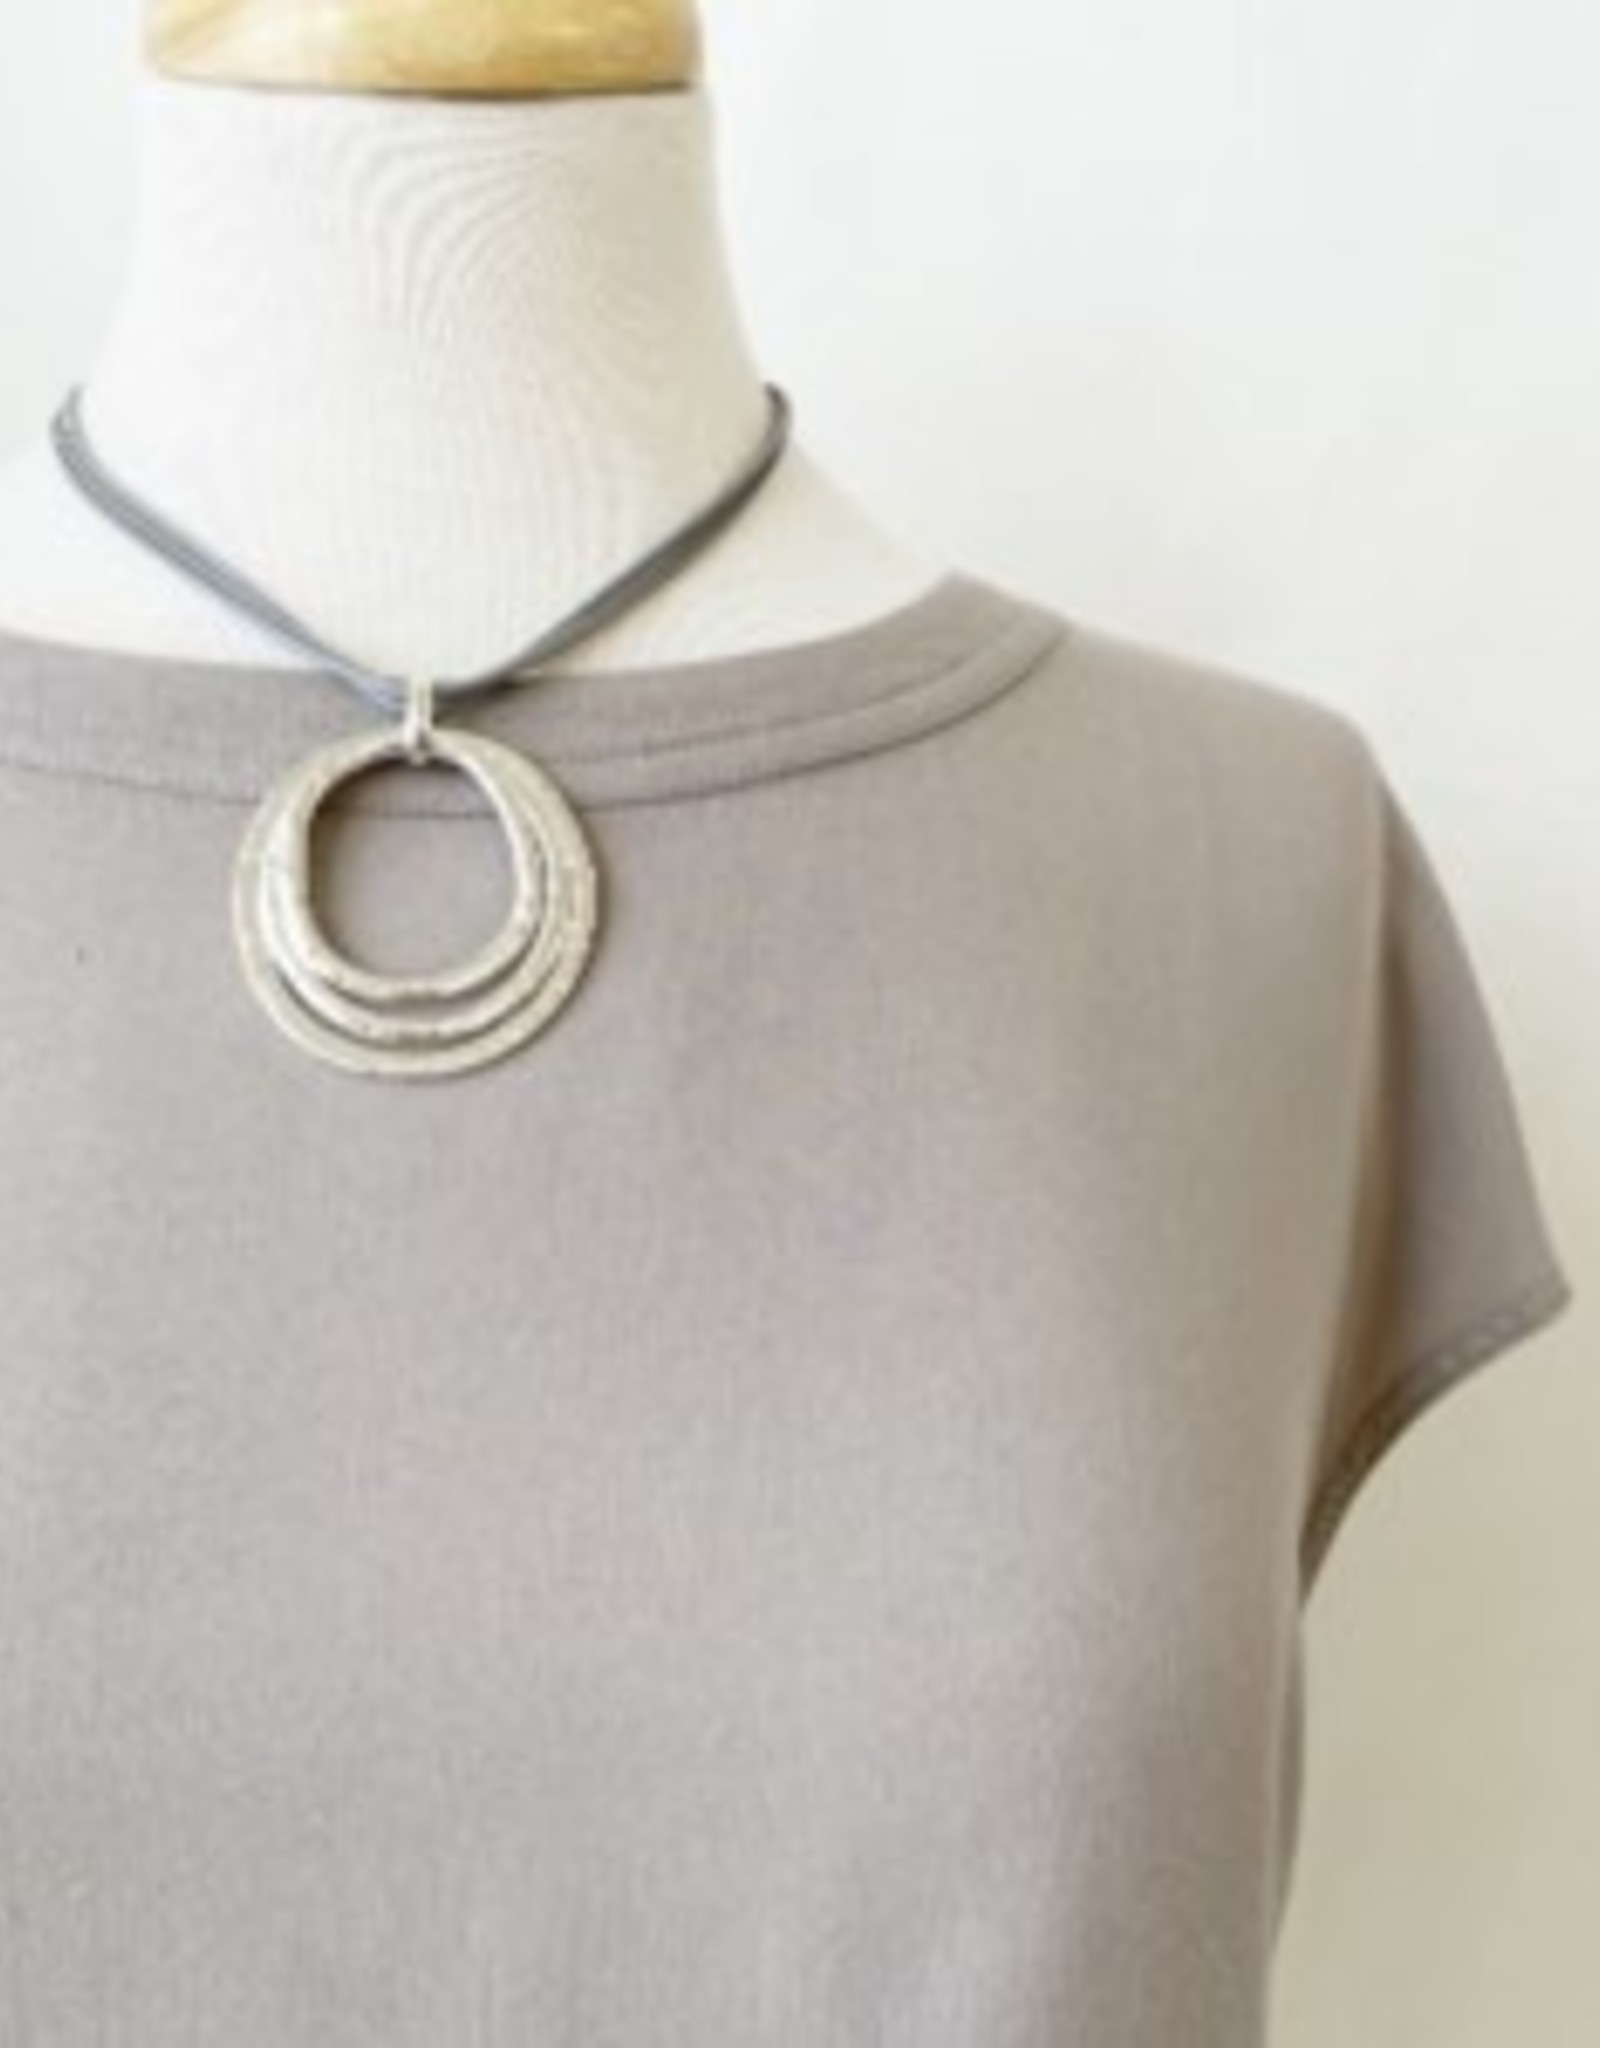 Caracol Caracol 1504 Silver and Grey Necklace on cords with Triple Hammered Rings Pendant